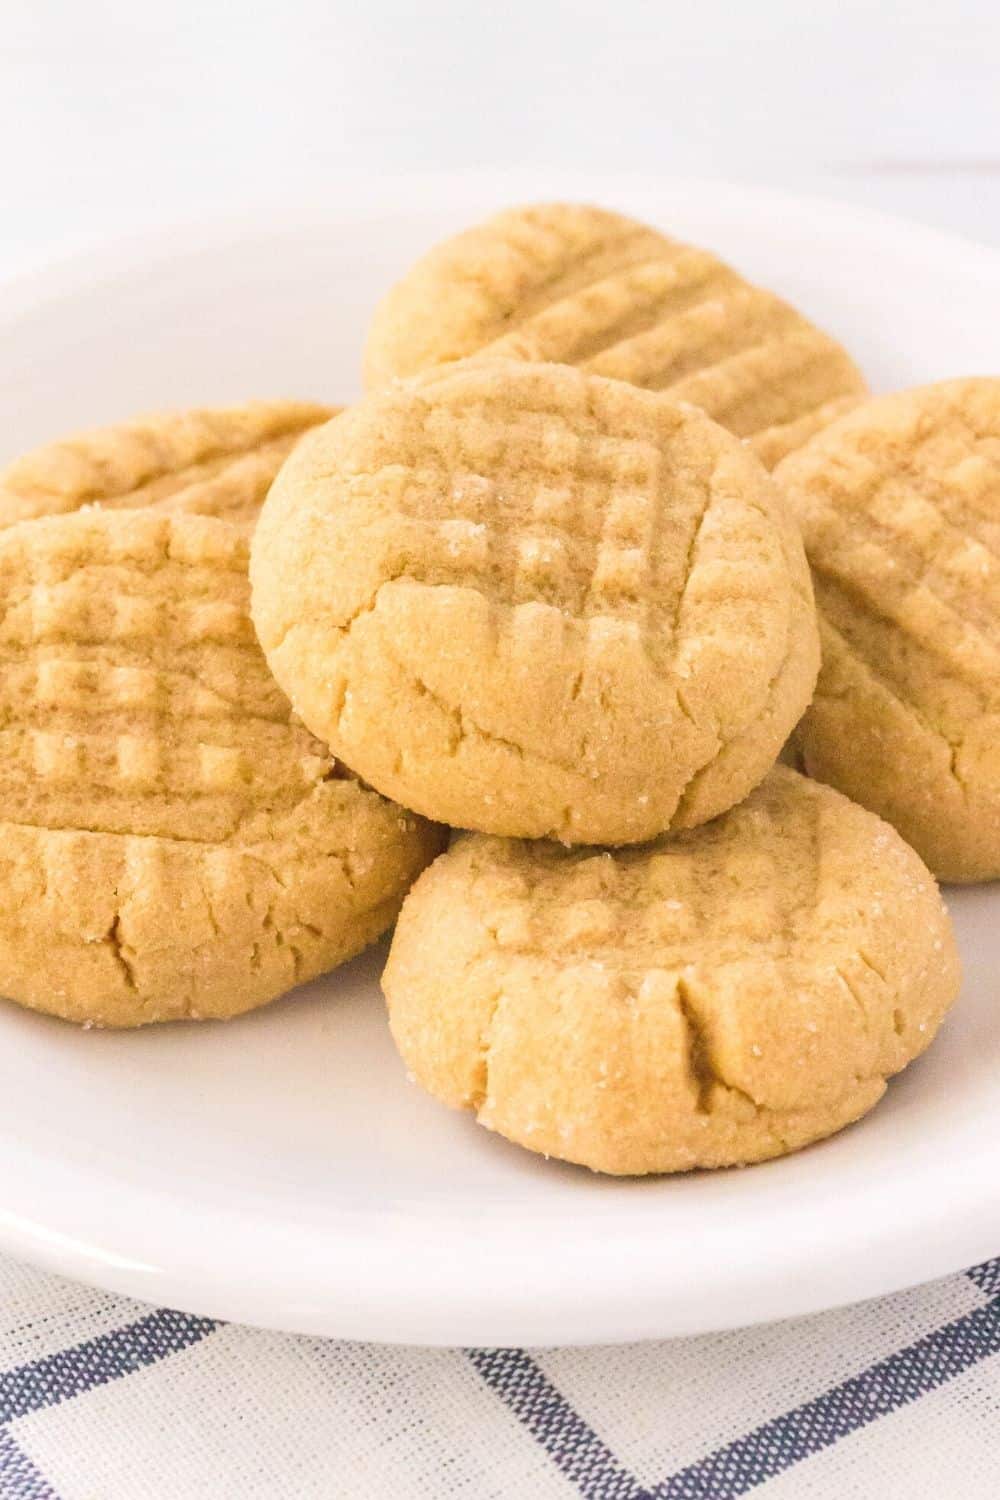 freshly baked soft and chewy peanut butter cookies on a white plate